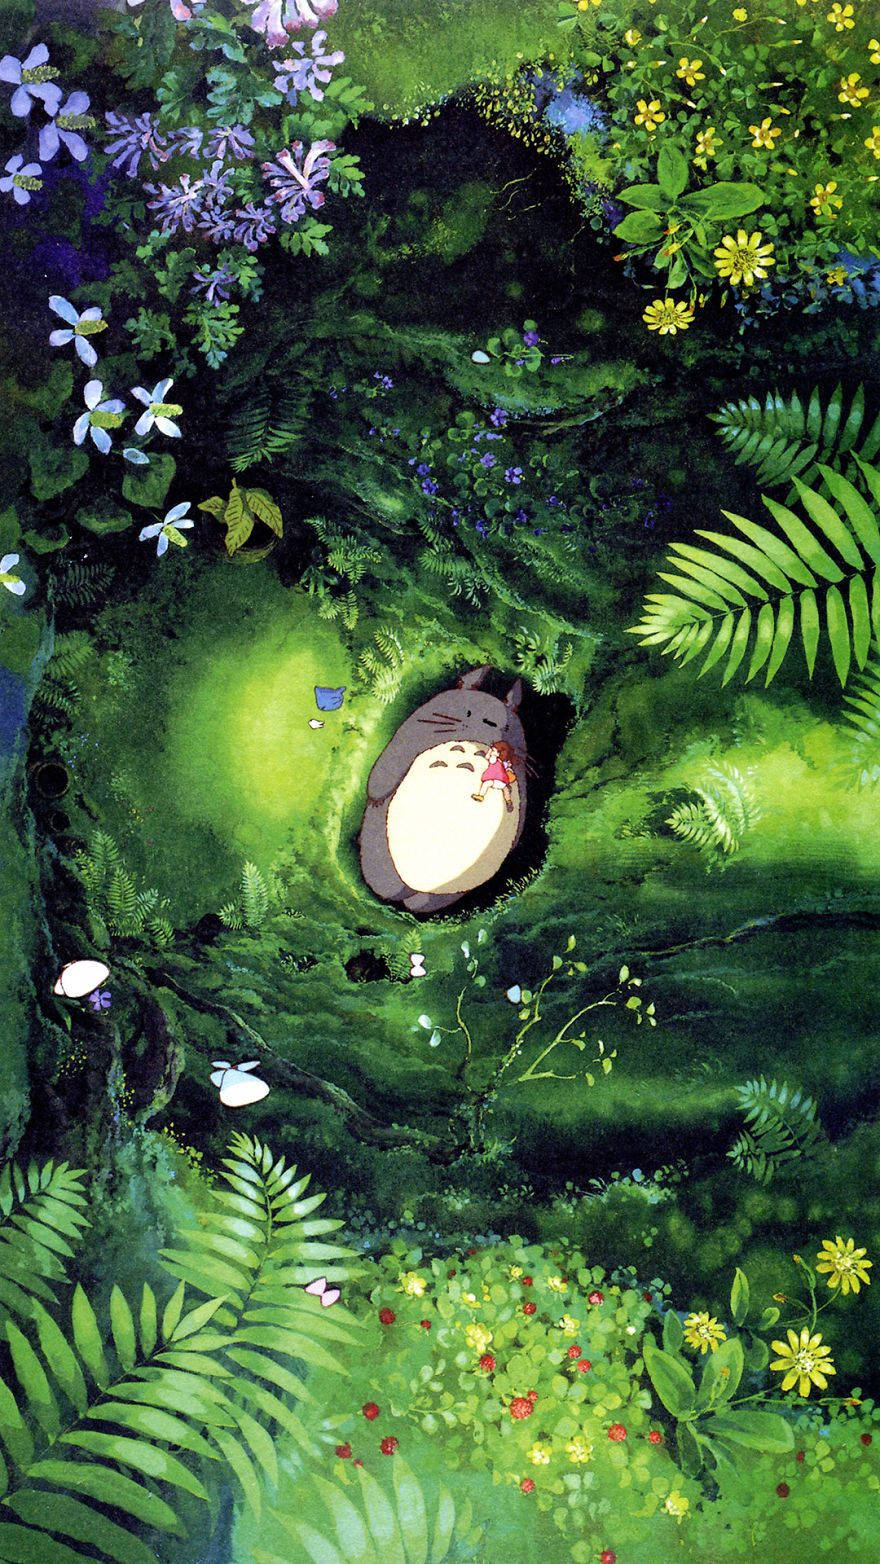 Magic awaits! Enjoy the exquisite world of Studio Ghibli on your iPhone Wallpaper